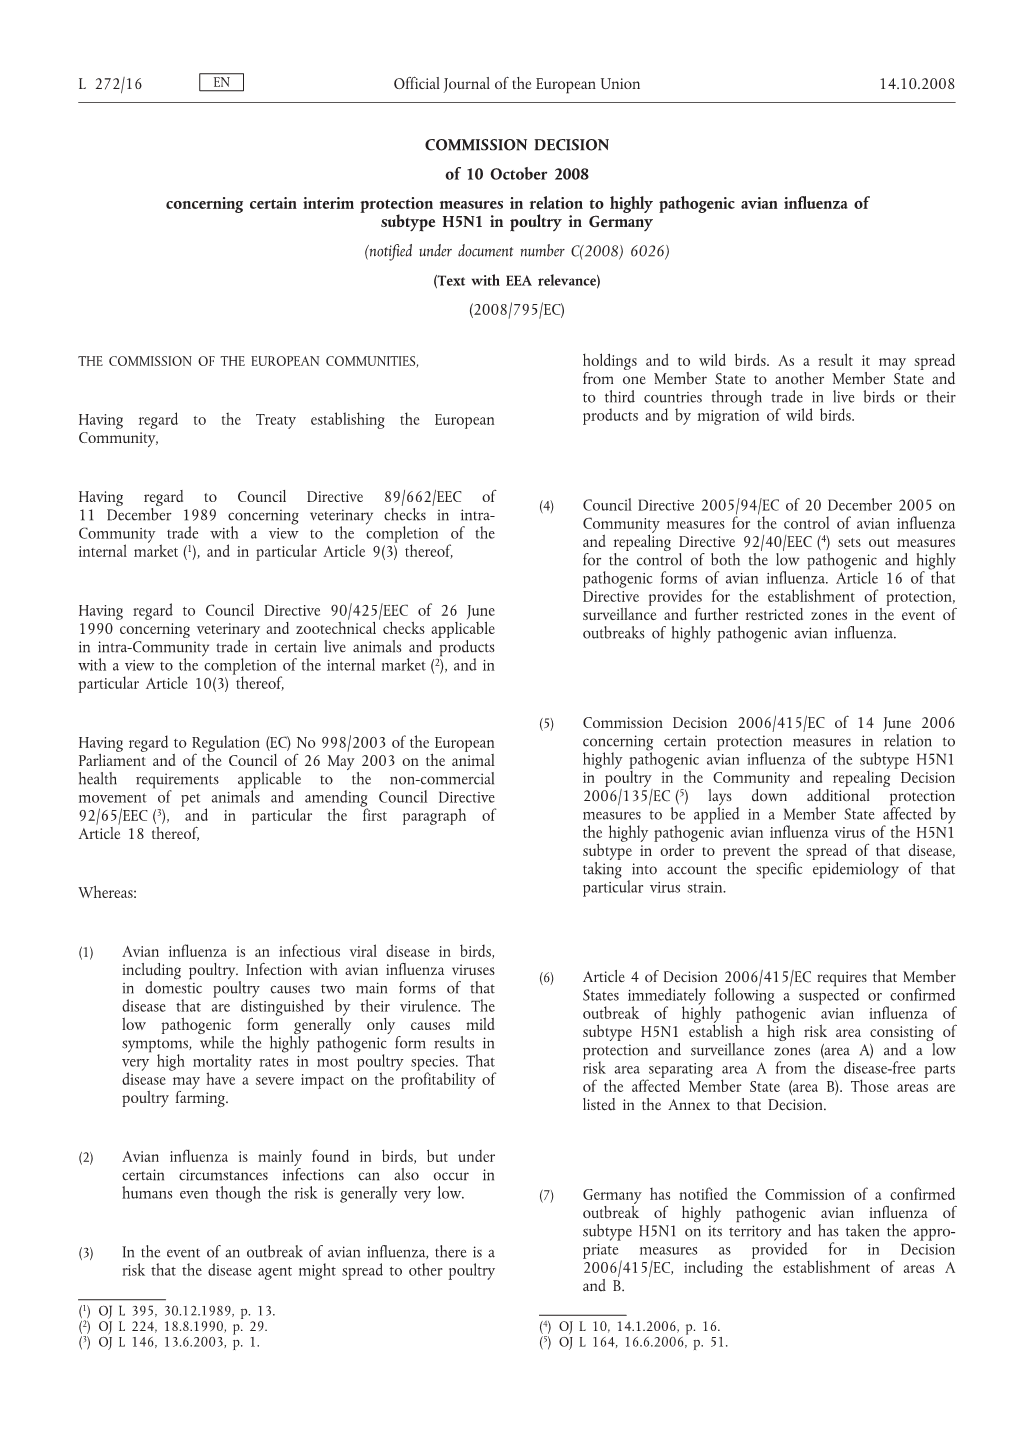 COMMISSION DECISION of 10 October 2008 Concerning Certain